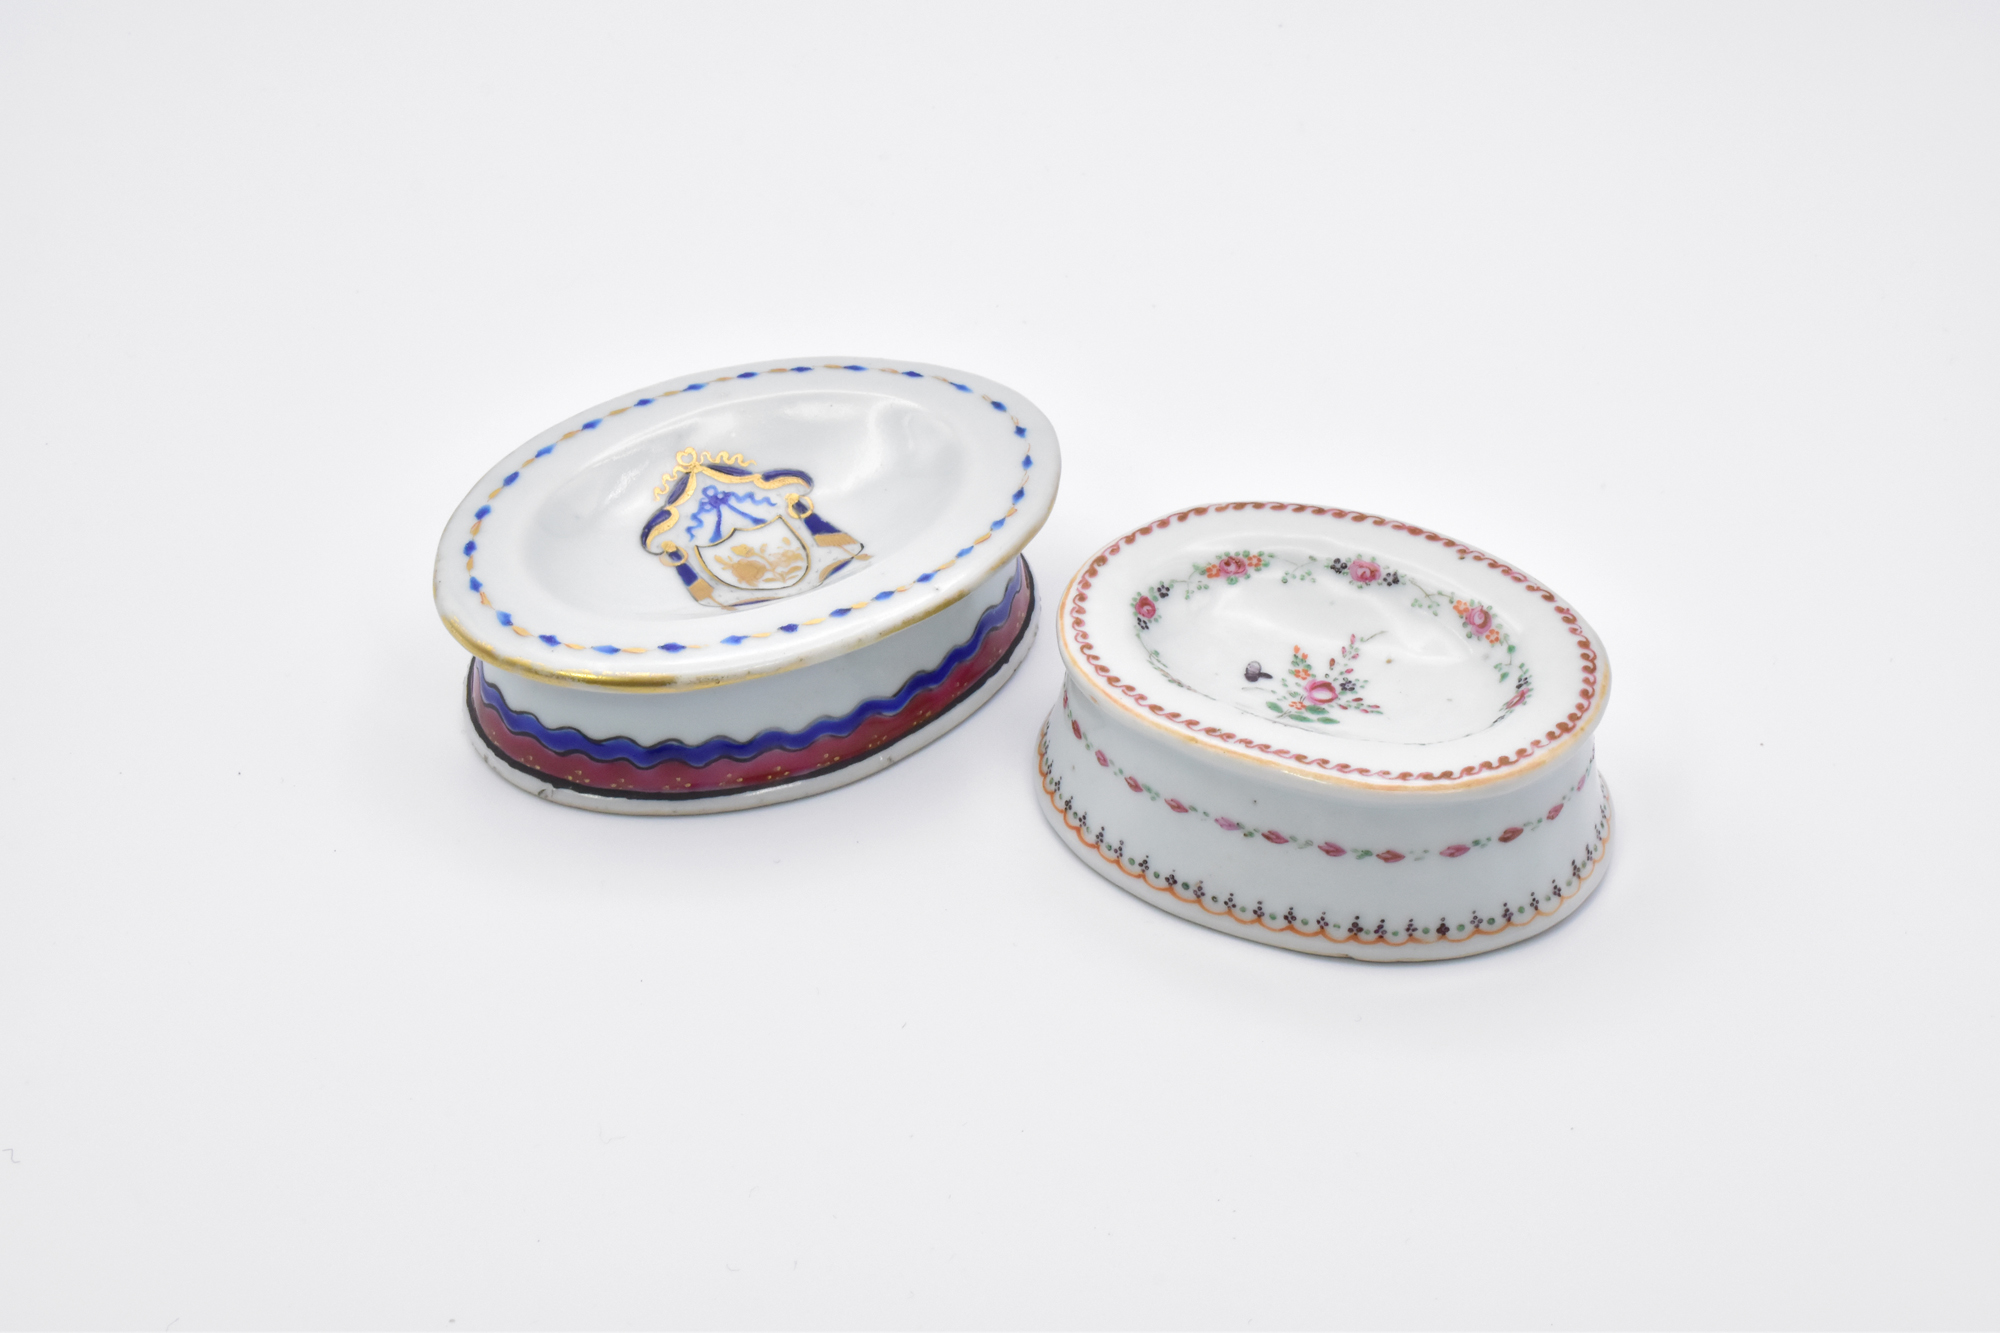 TWO CHINESE EXPORT PORCELAIN OVAL SALTS, QING DYNASTY, QIANLONG PERIOD, 1736 – 1795